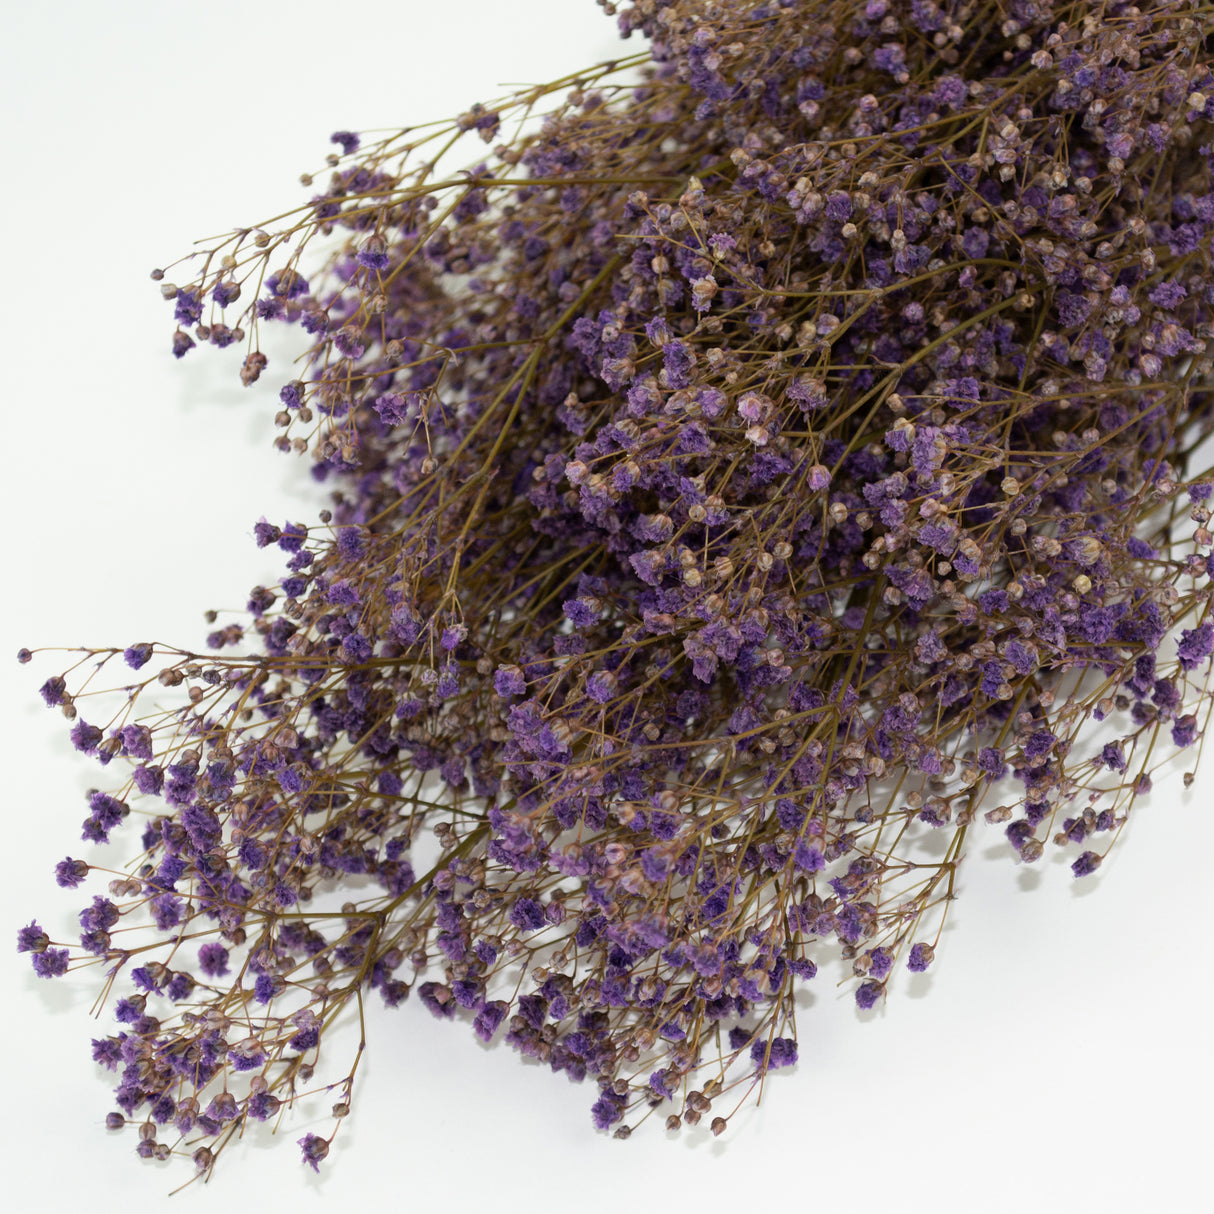 This is an image of a bunch of preserved lilac gypsophila on a white background.